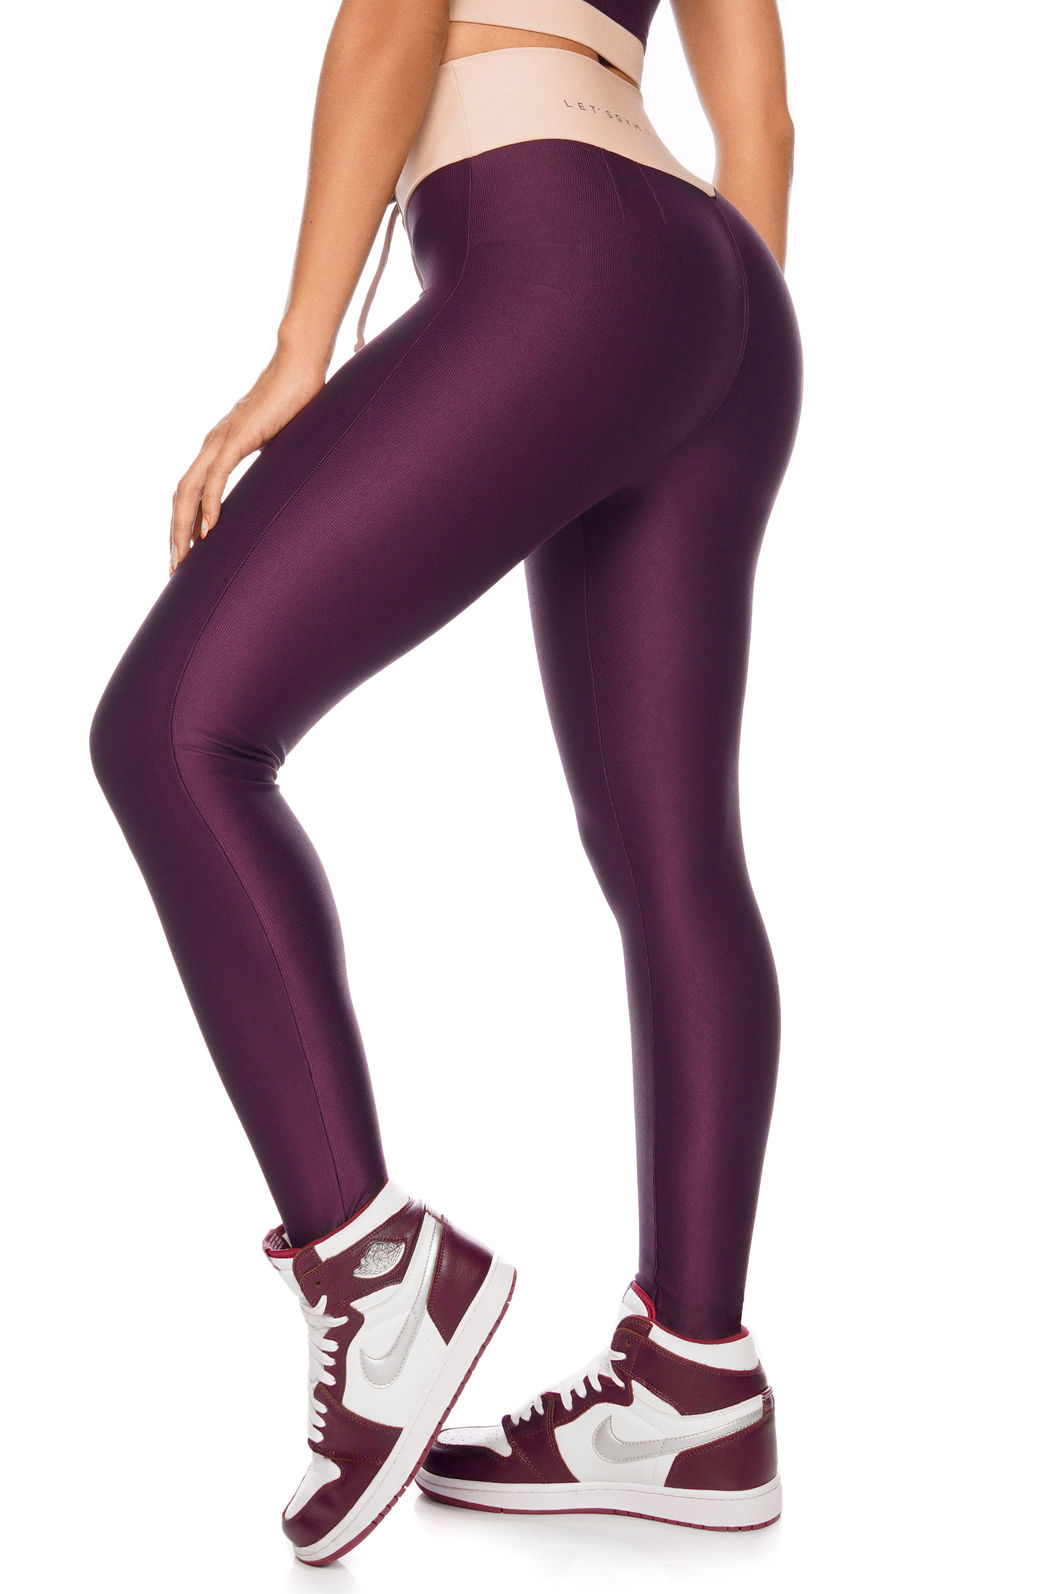 Shiny Leggings - Page 2 of 2 - PCP Clothing